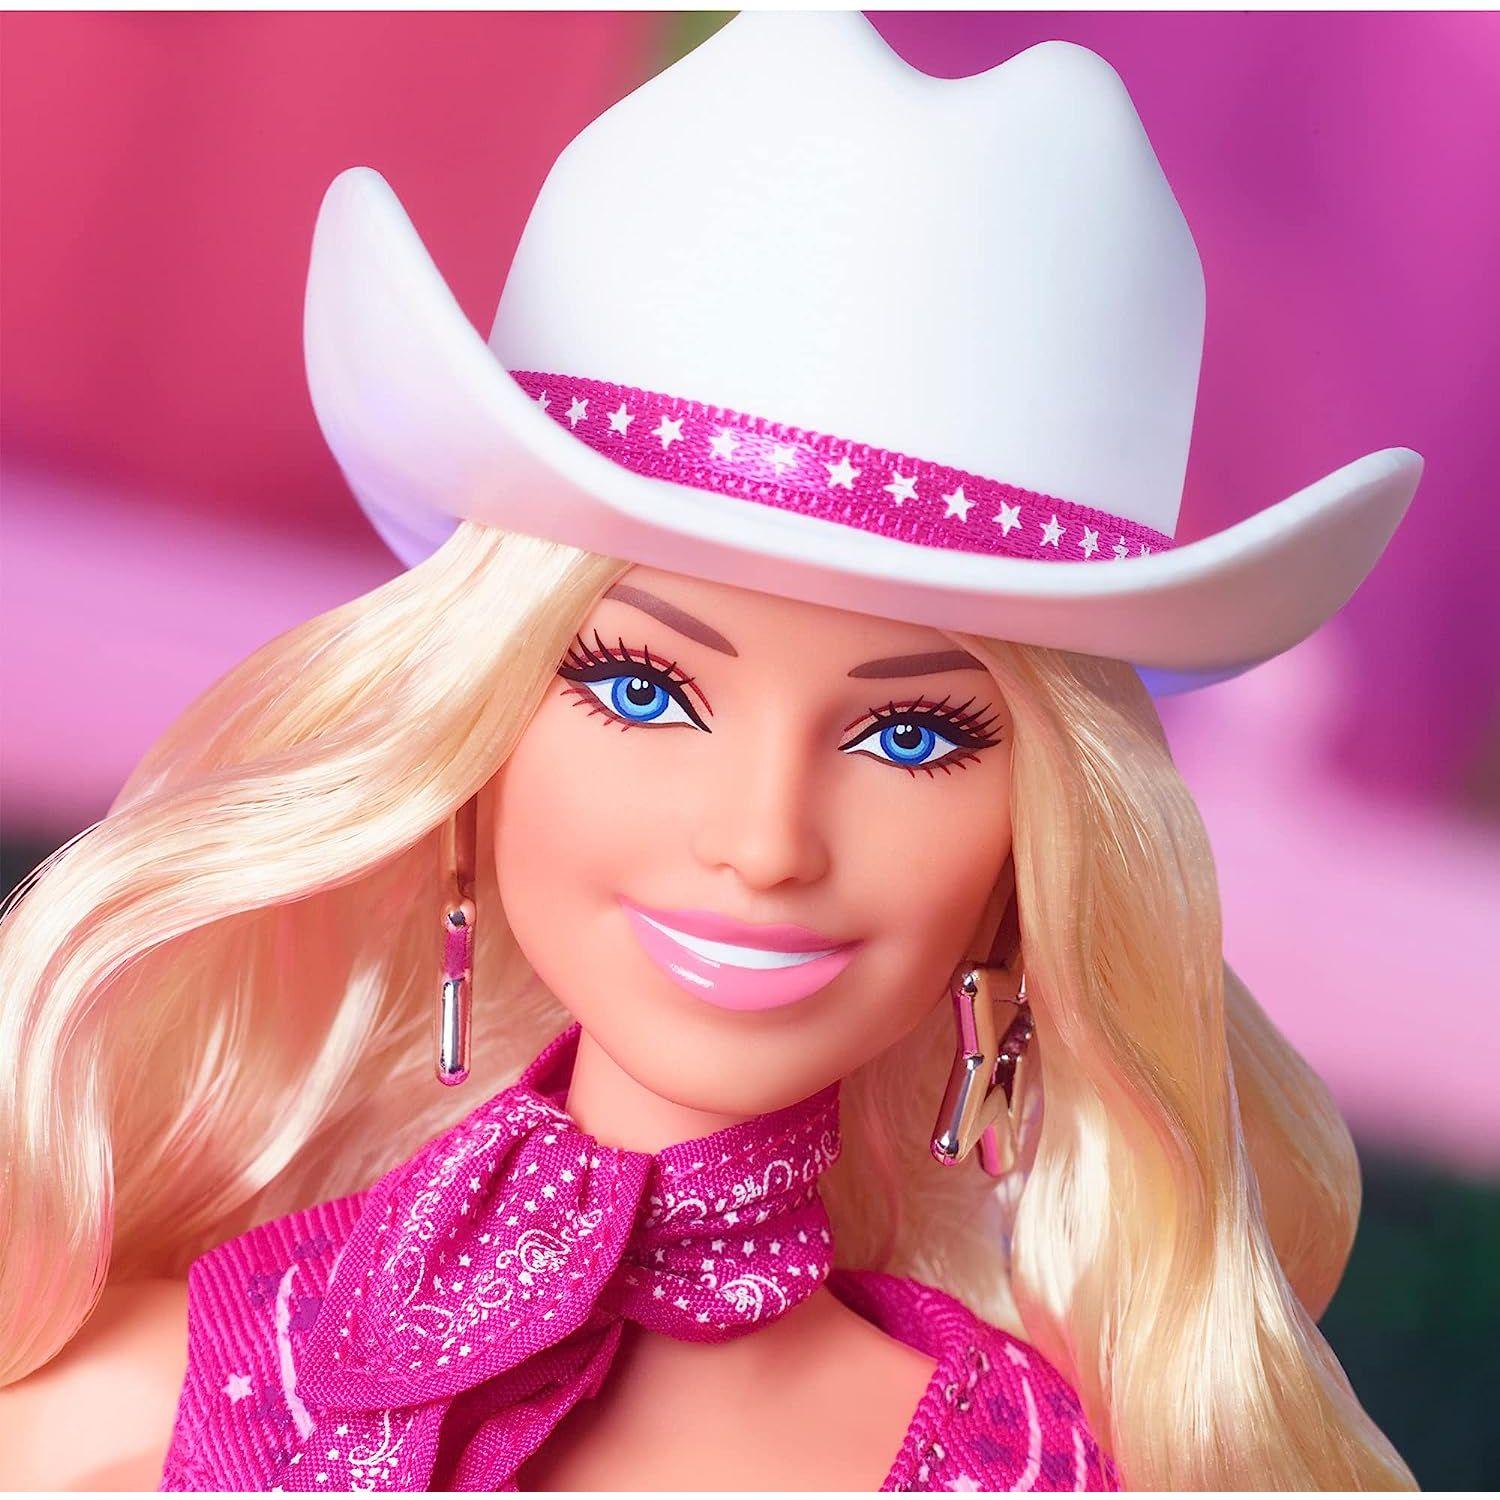 Barbie: The Movie Collectible Doll Margot Robbie as in Pink Western Outfit - BumbleToys - 5-7 Years, Barbie, Boys, Disney Princess, dup-review-publication, Fashion Dolls & Accessories, Girls, Mattel, Pre-Order